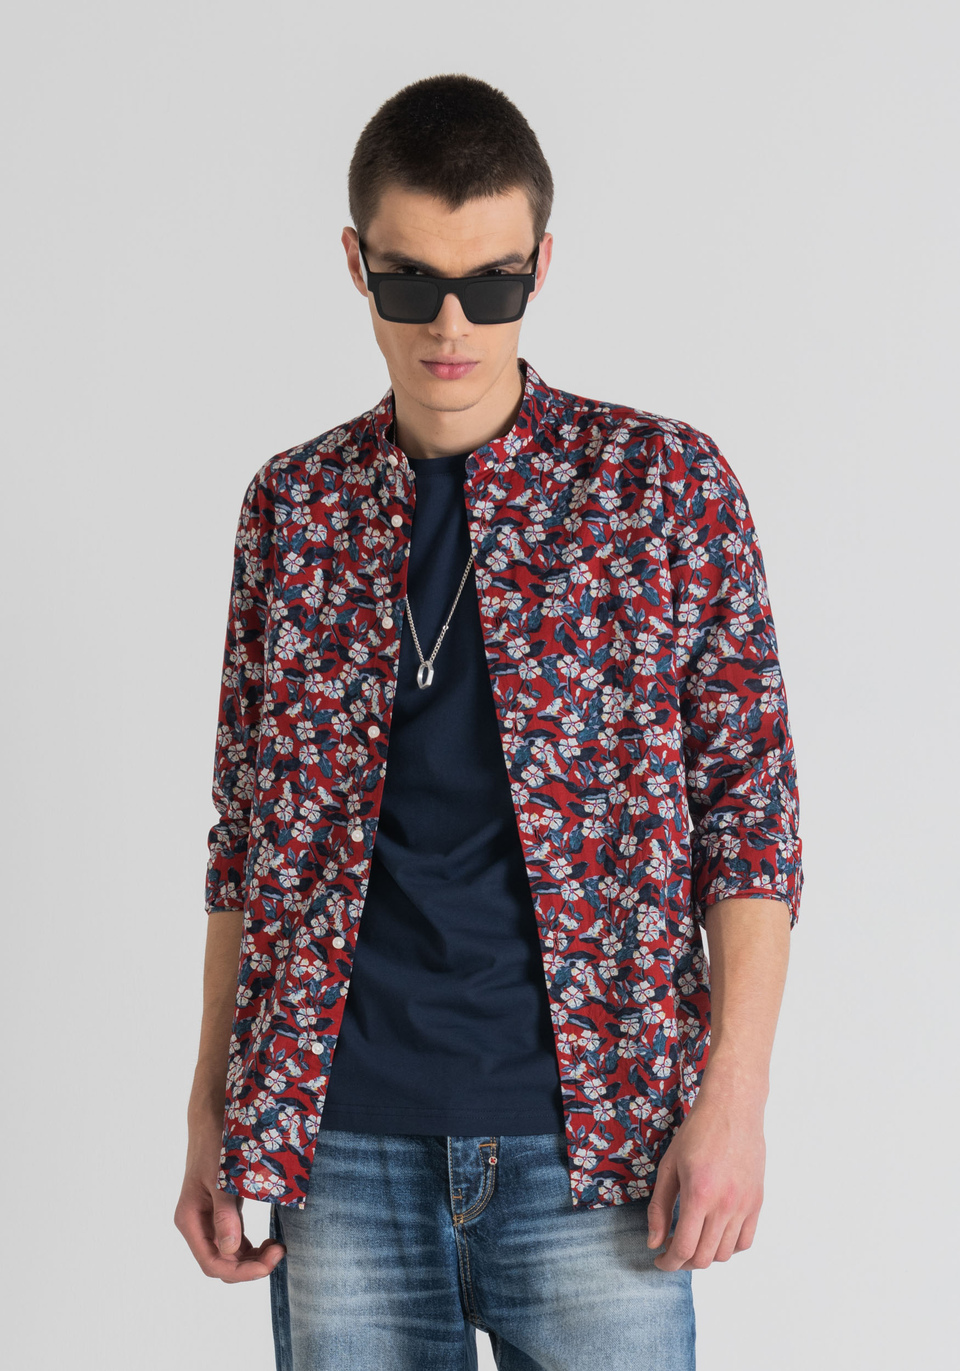 SLIM-FIT “SEOUL” SHIRT IN 100% COTTON WITH A FLORAL PRINT PATTERN - Antony Morato Online Shop